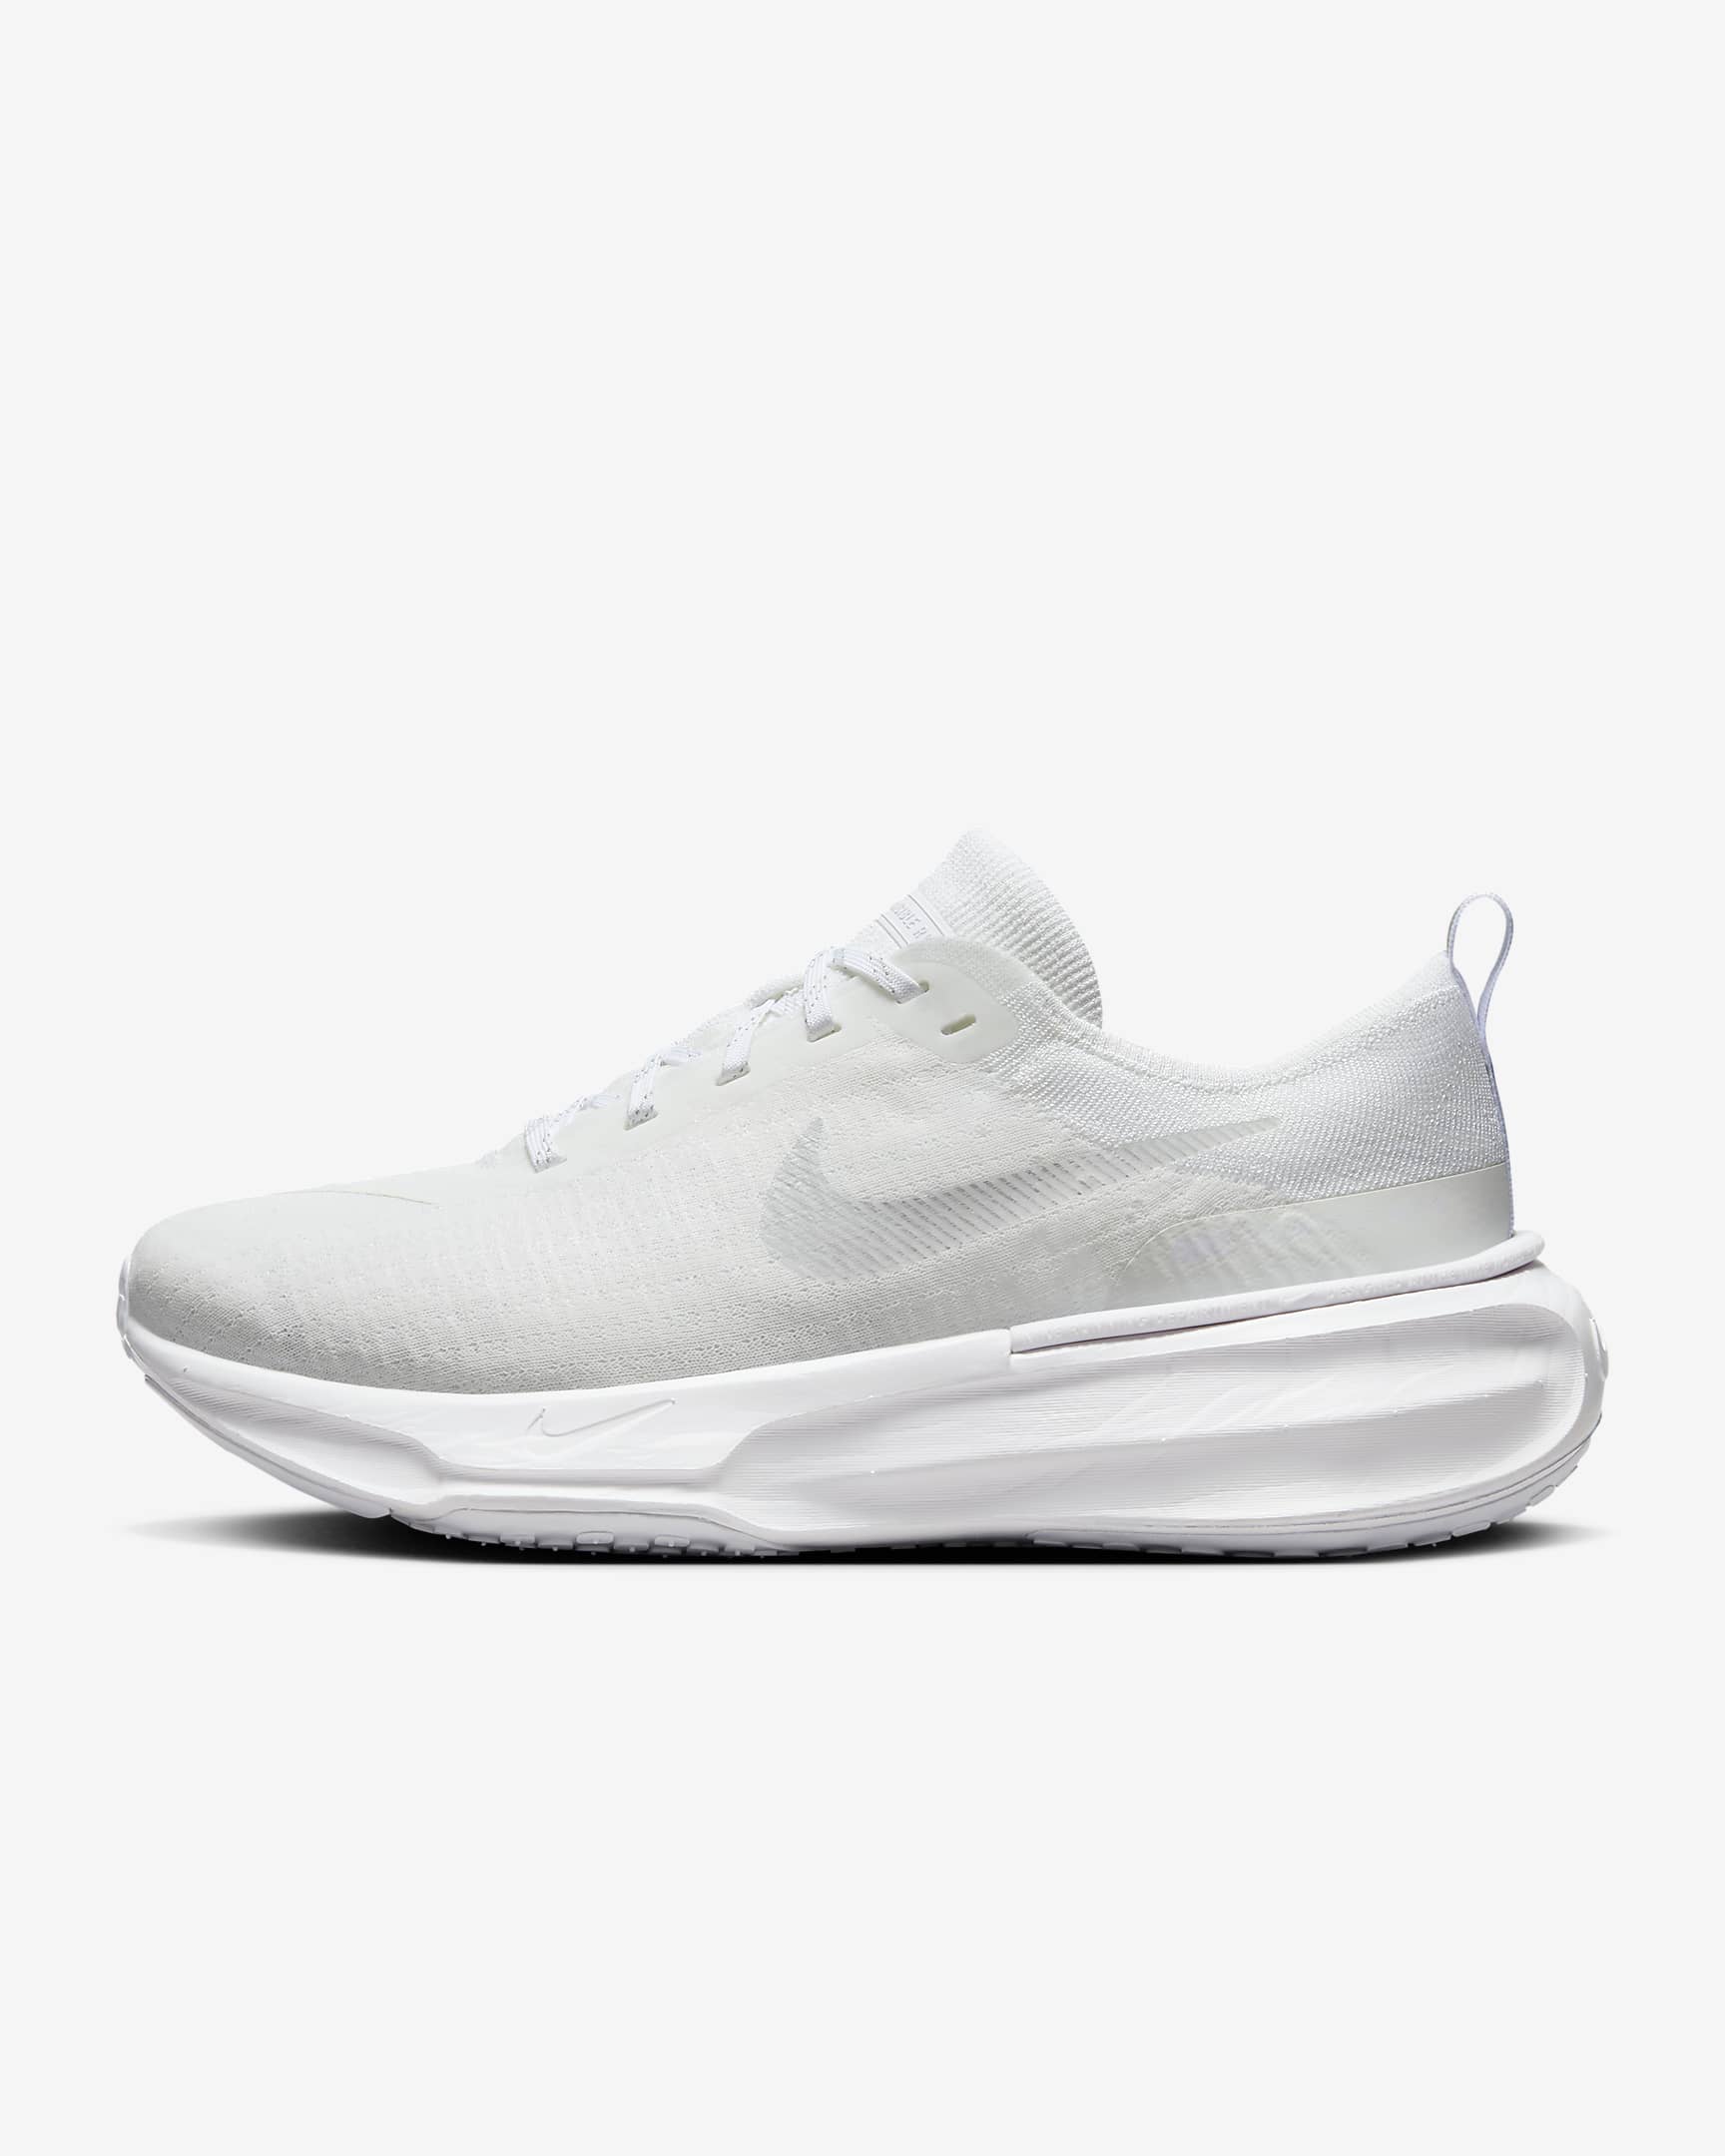 Nike Invincible 3 Men's Road Running Shoes (Extra Wide) - White/Platinum Tint/White/Photon Dust